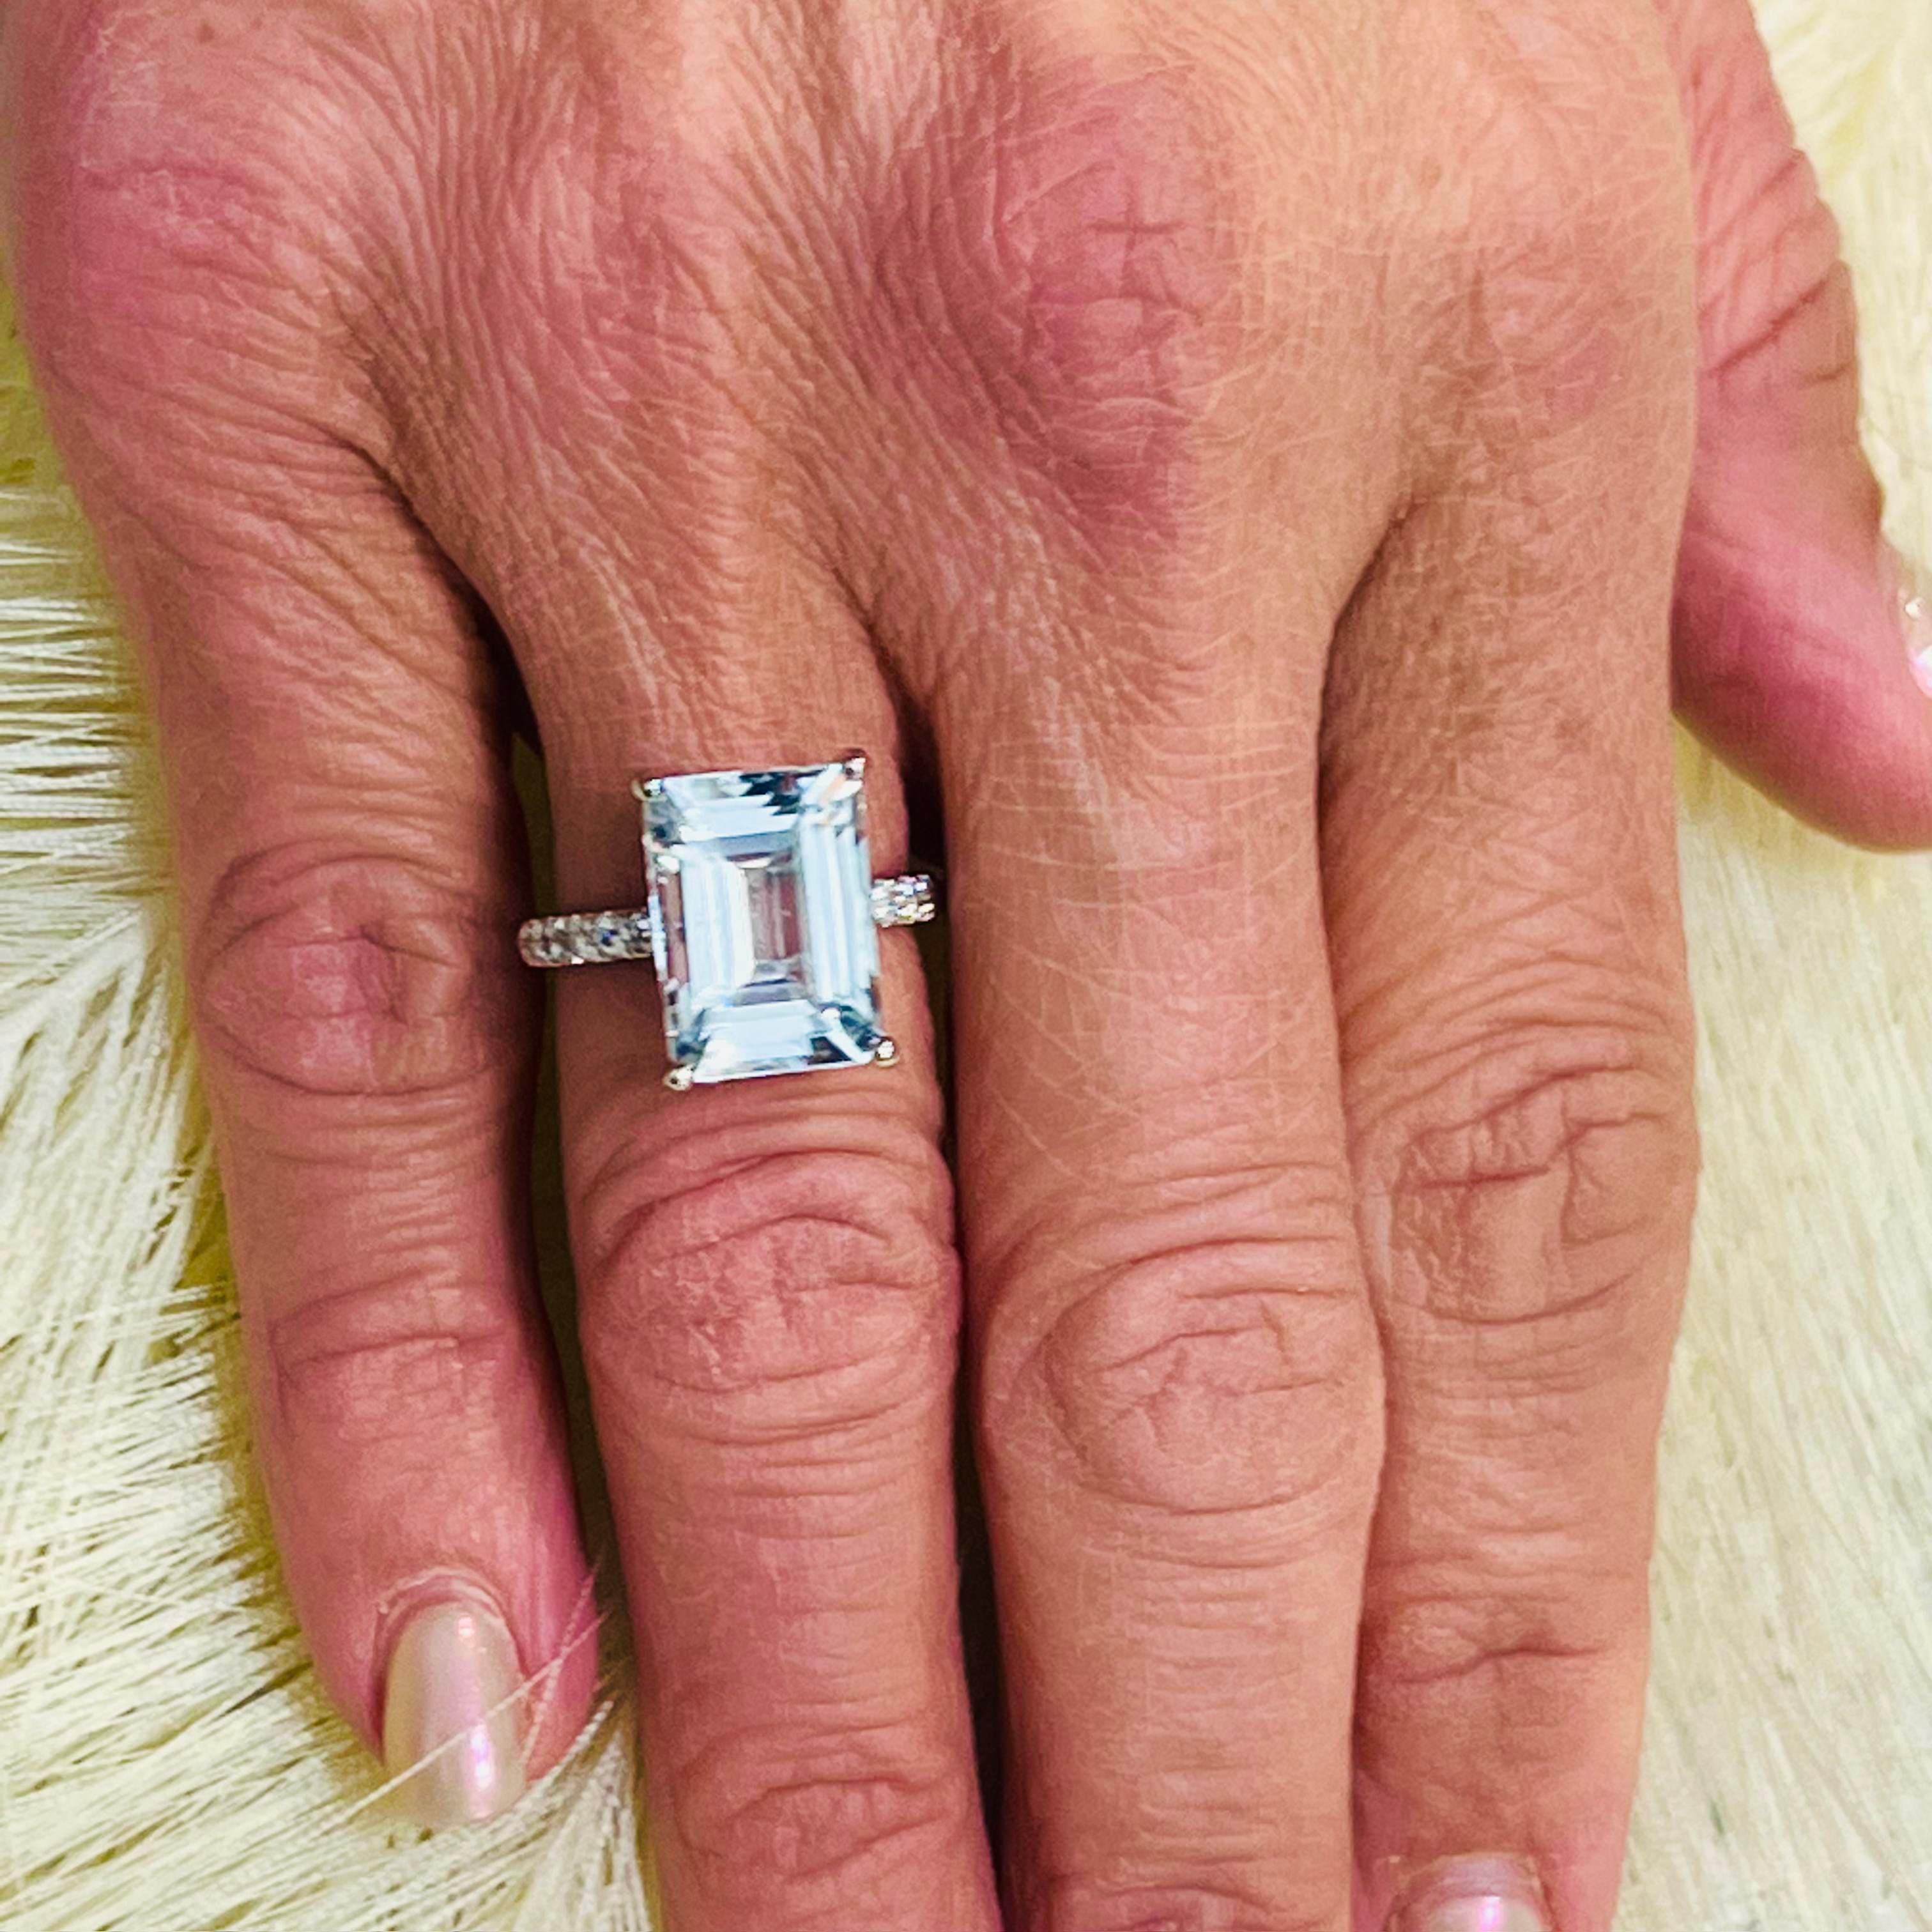 Natural Aquamarine Diamond Ring Size 6.5 14k W Gold 6.67 TCW Certified $5,990 216191

This is a Unique Custom Made Glamorous Piece of Jewelry!

Nothing says, “I Love you” more than Diamonds and Pearls!

This Aquamarine ring has been Certified,